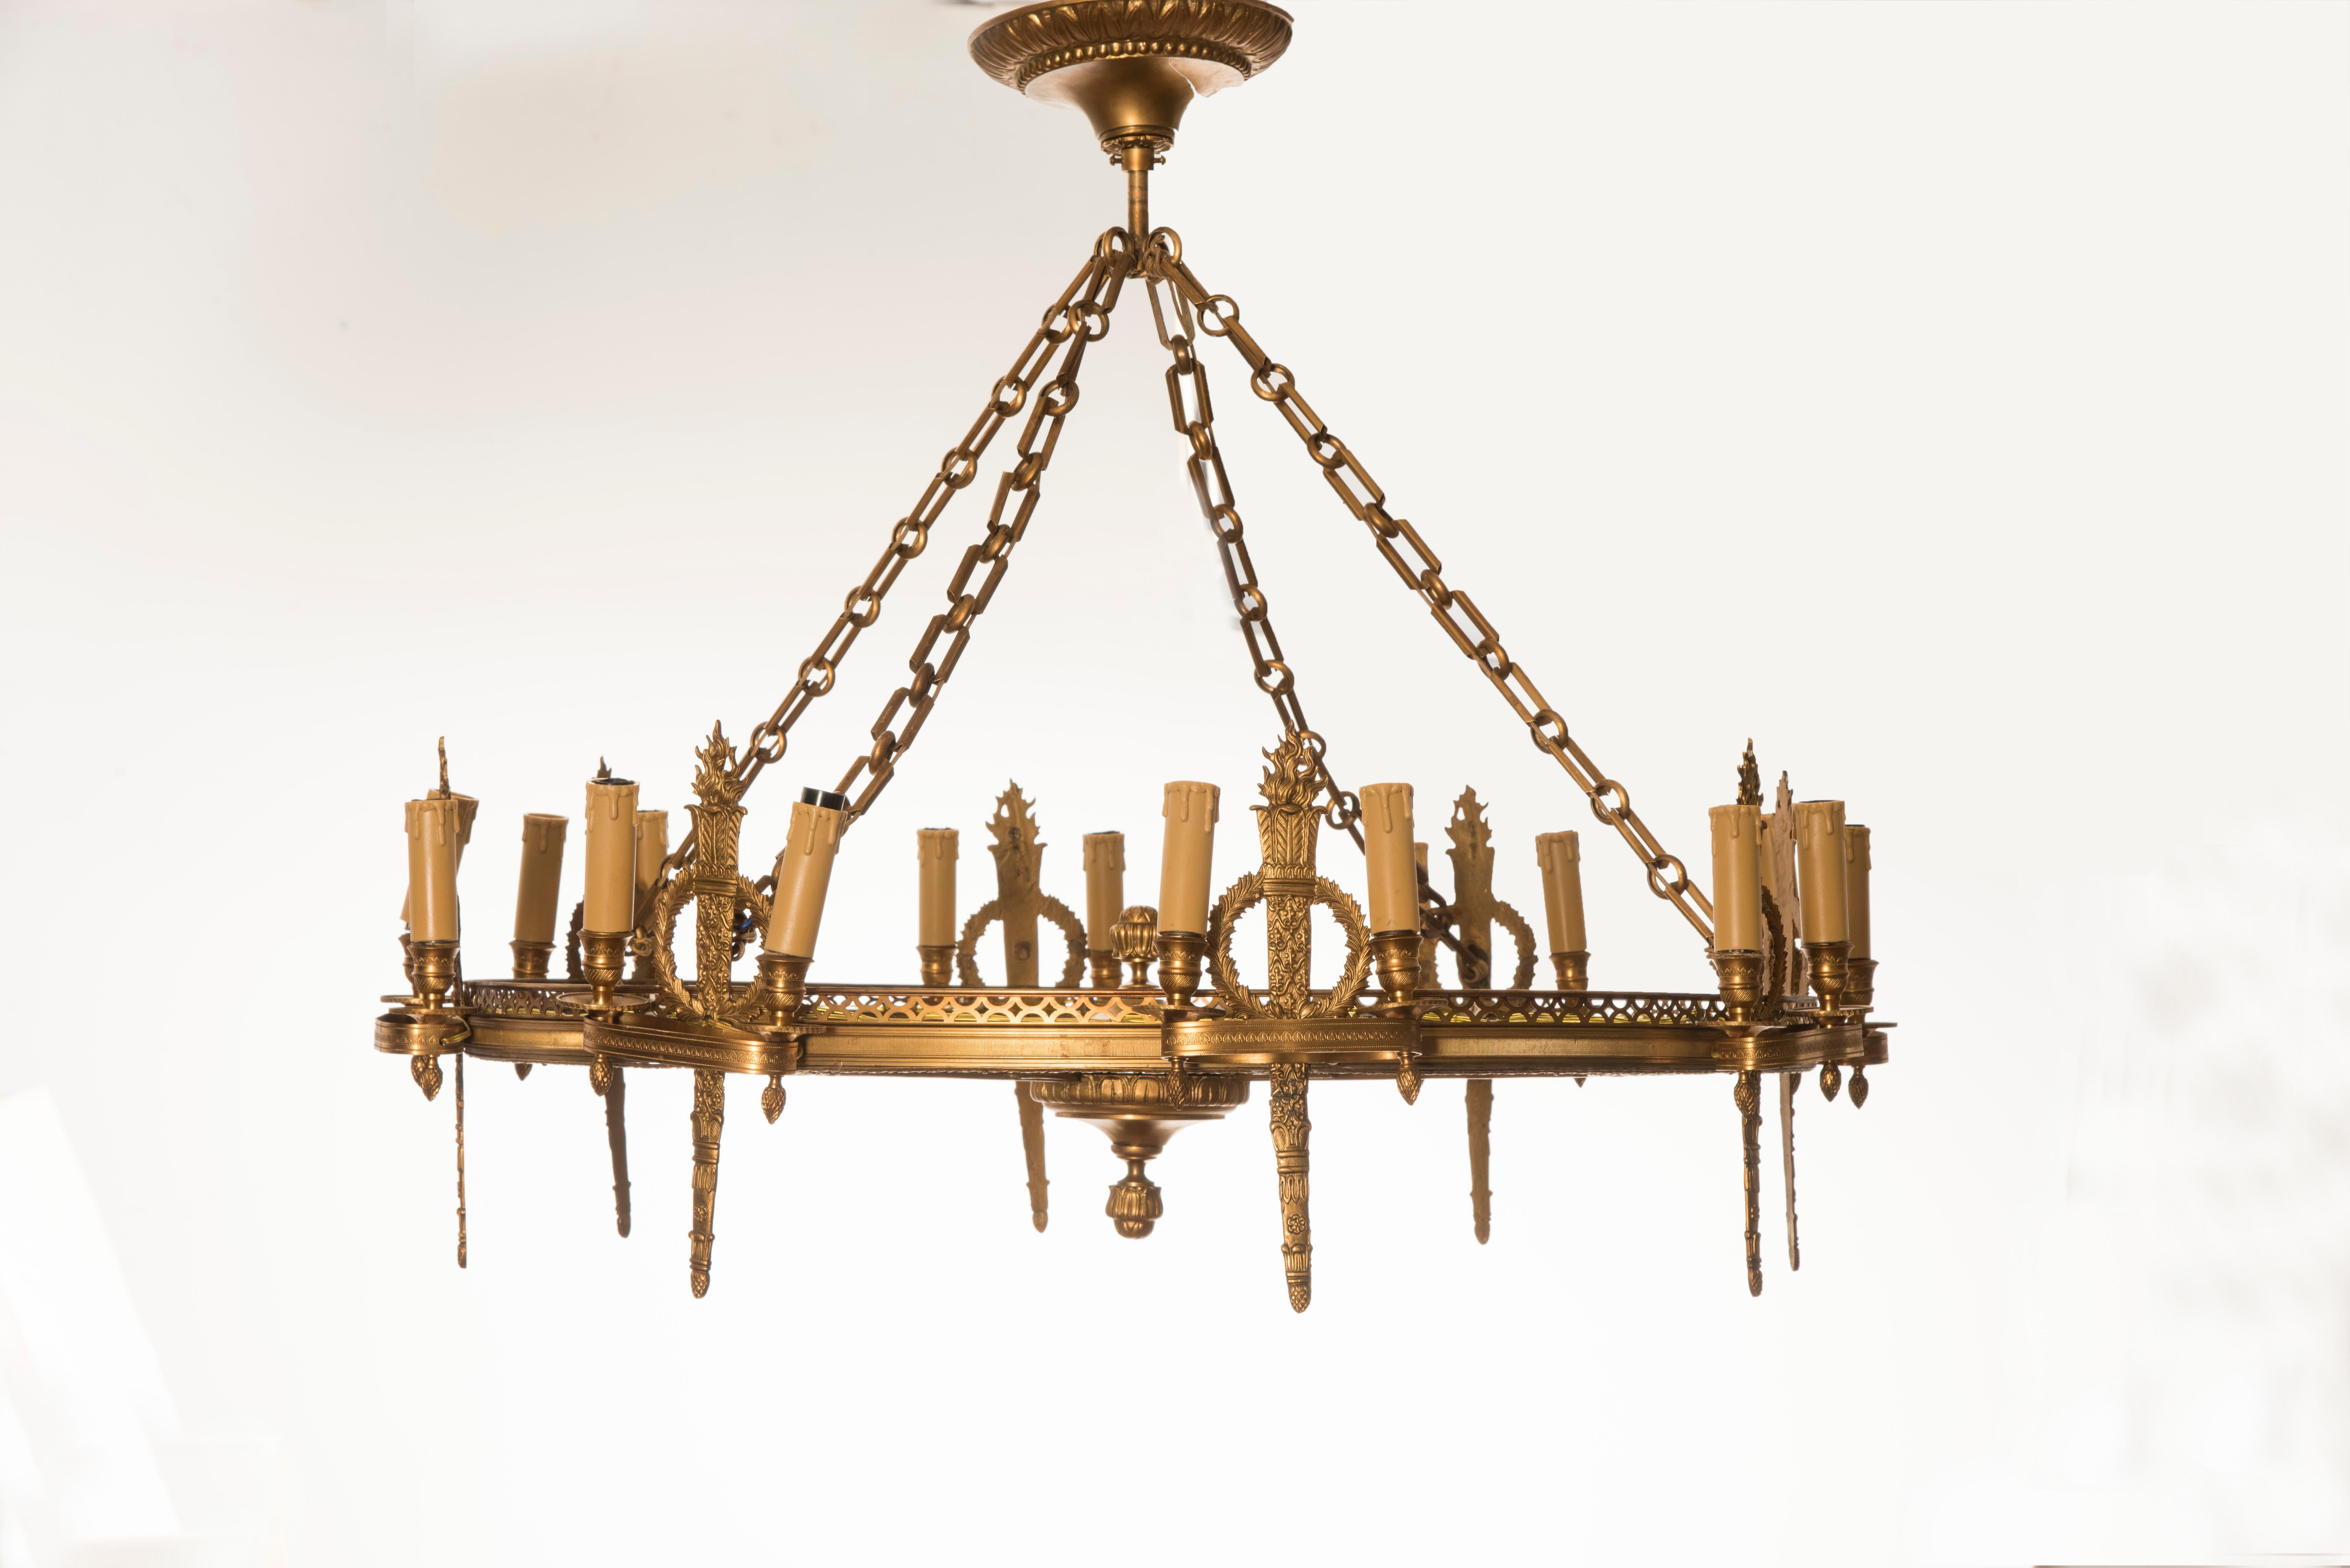 Napoleon III golden bronze eight-light rounded chandelier, from France from late 19th century in correspondence of each light holder there is quiver shaped bronze decoration. 

The chandelier is in excellent conditions. We have completely restored